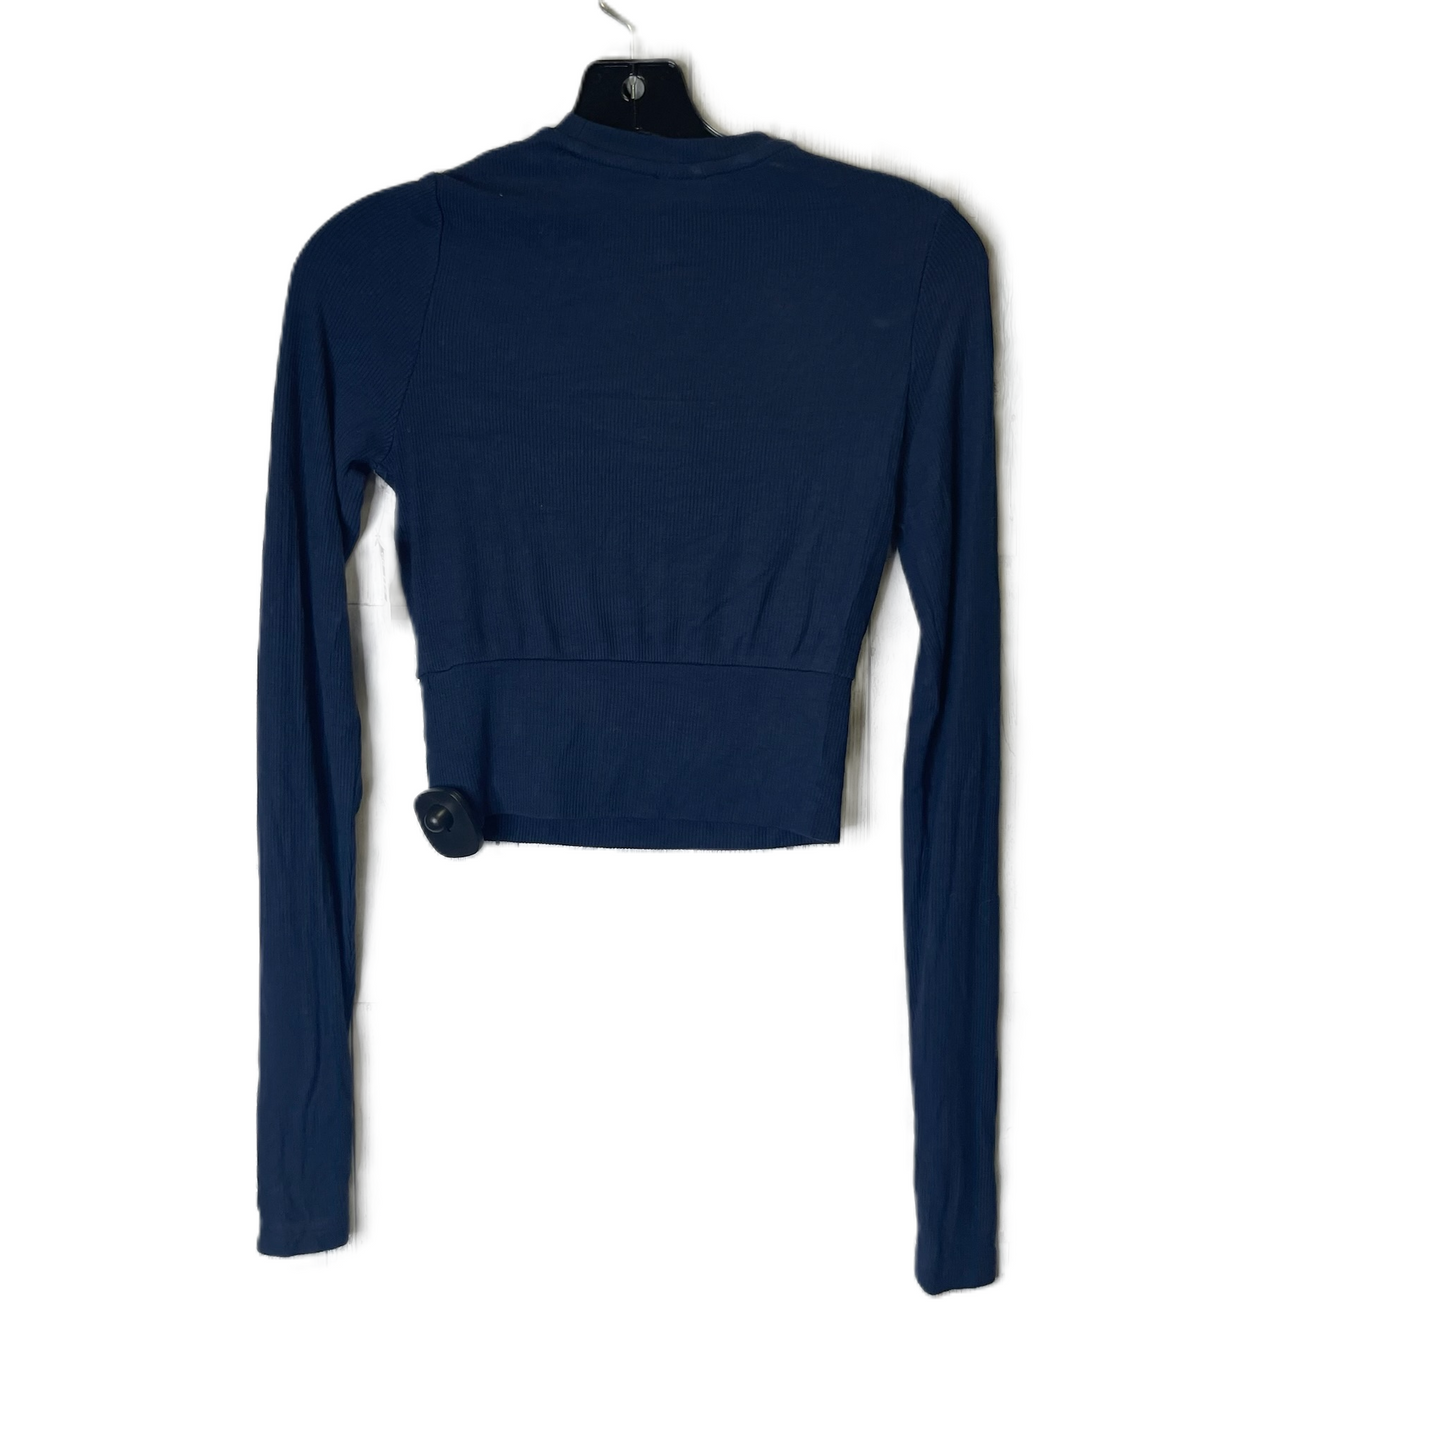 Blue Athletic Top Long Sleeve Crewneck By Clothes Mentor, Size: S